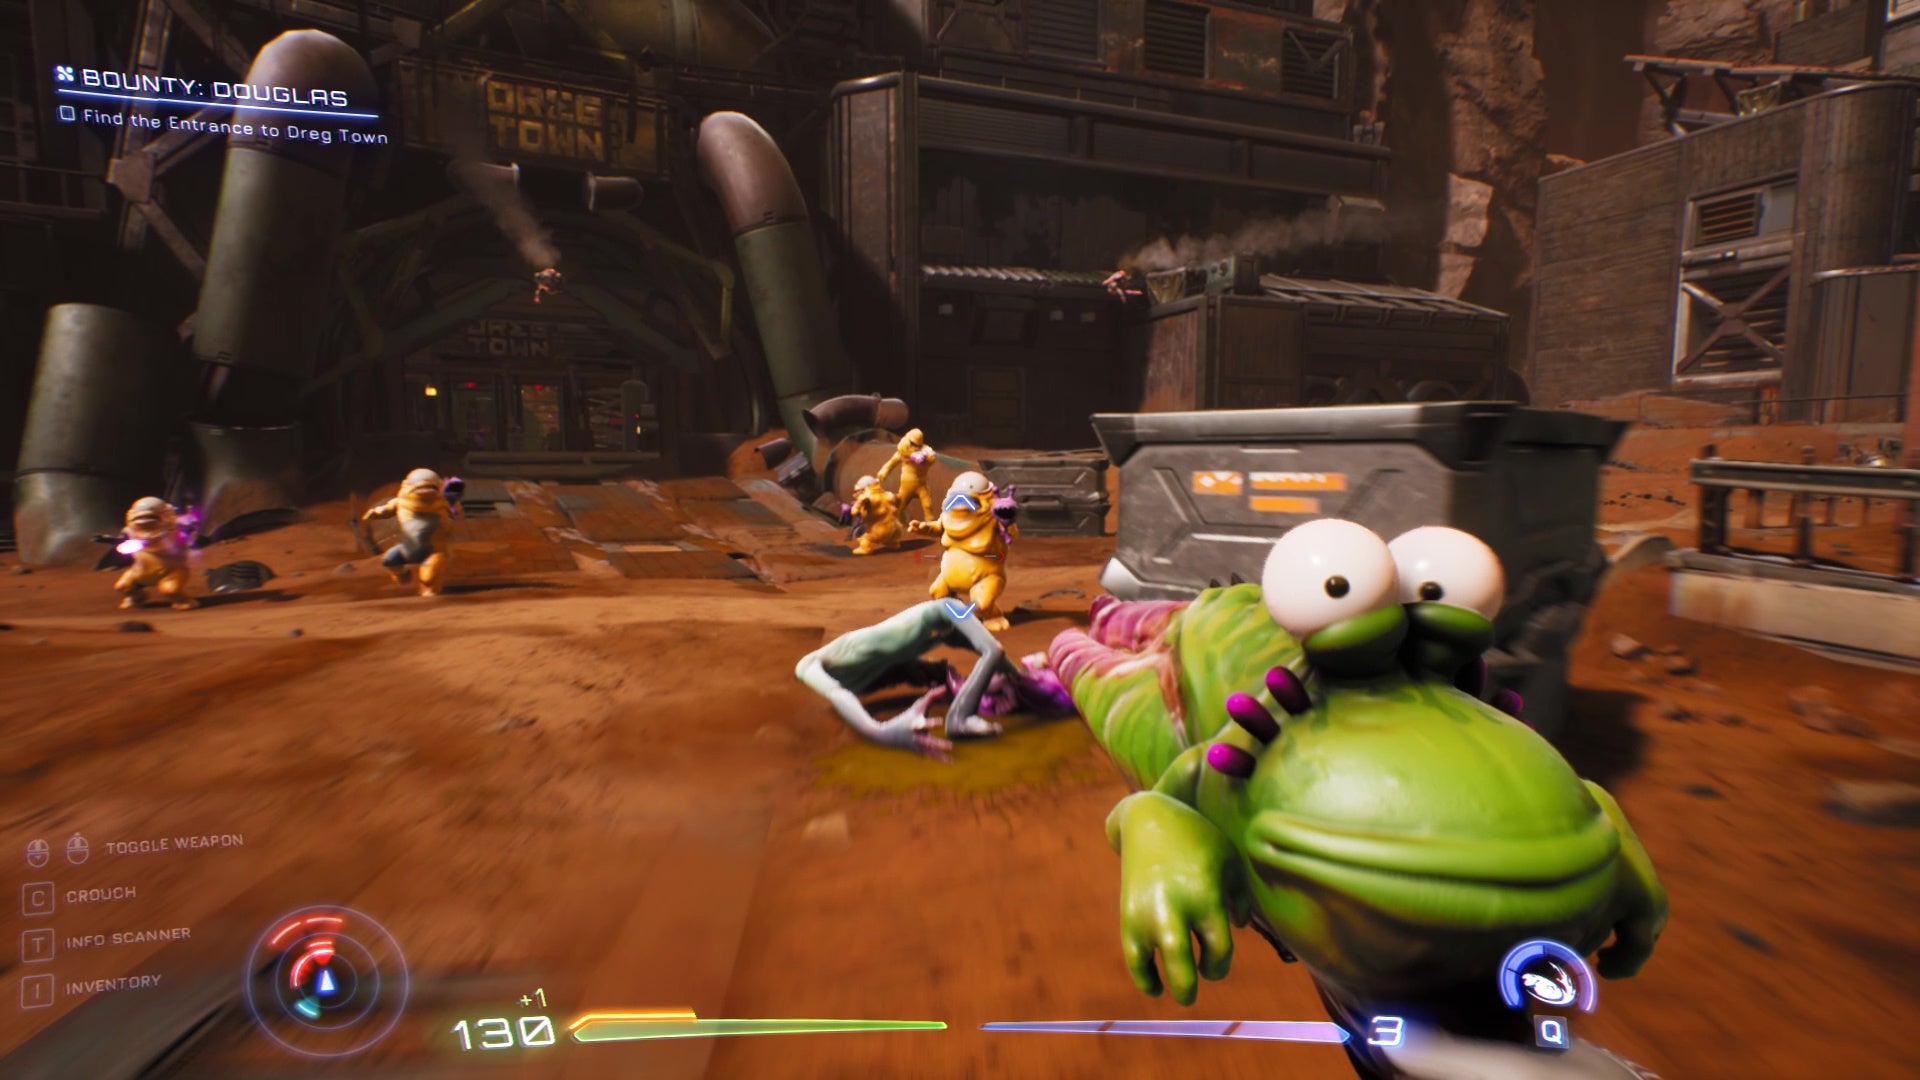 The player wields a green alien gun and fires at some blobby, yellow enemies in High On Life.